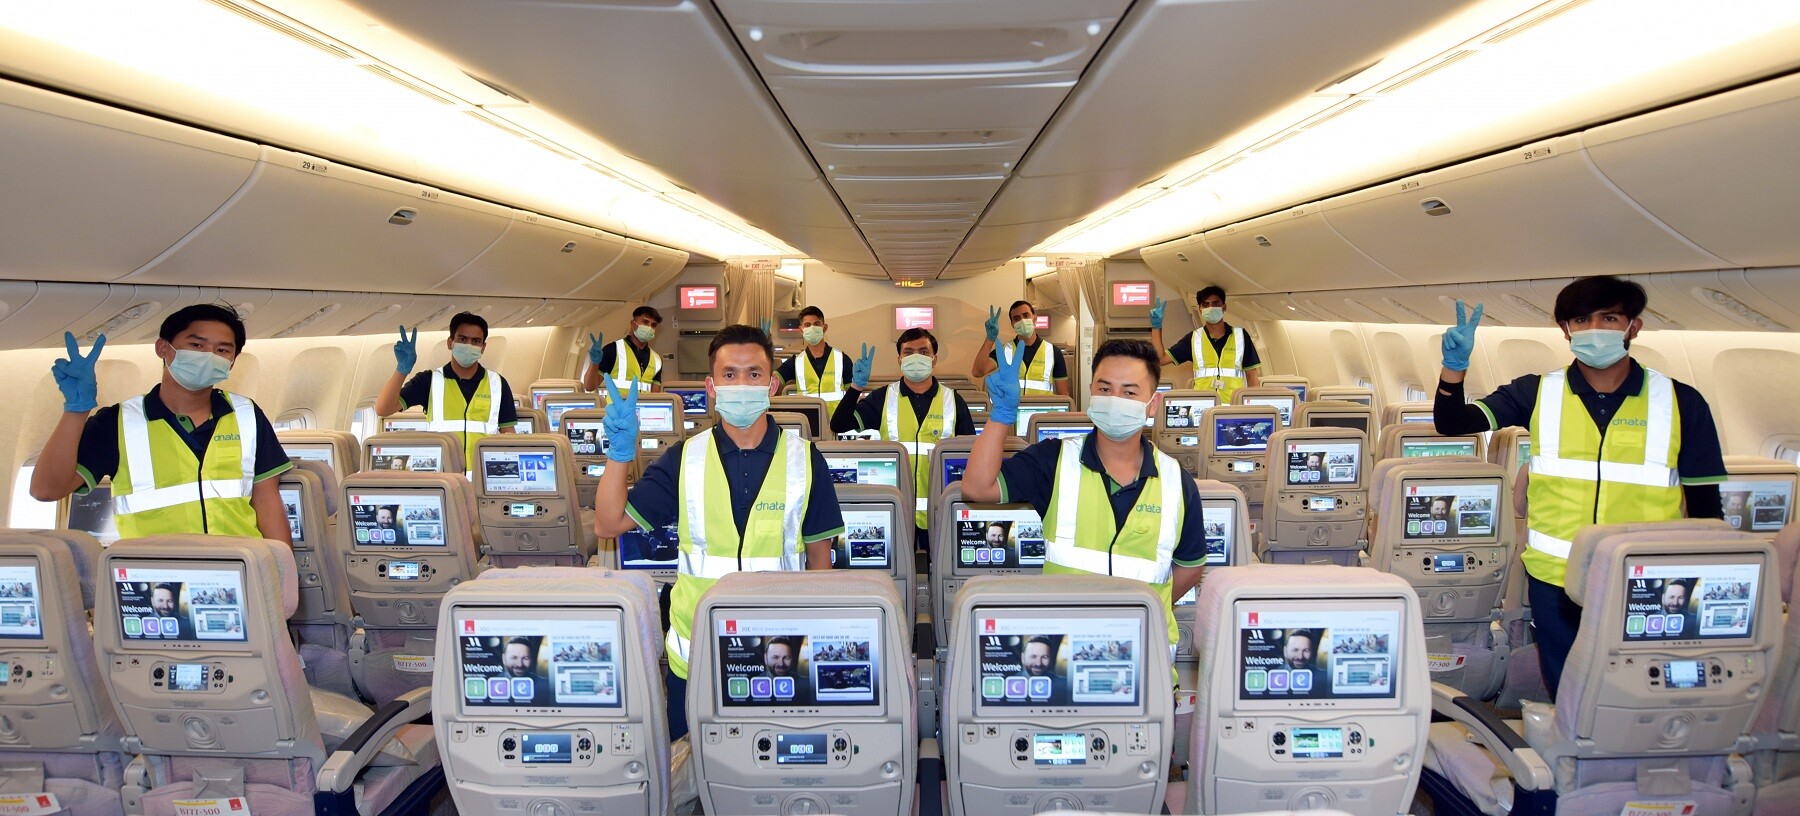 Safety above all, always: Emirates operates first flight serviced by  fully vaccinated frontline teams across all customer touchpoints